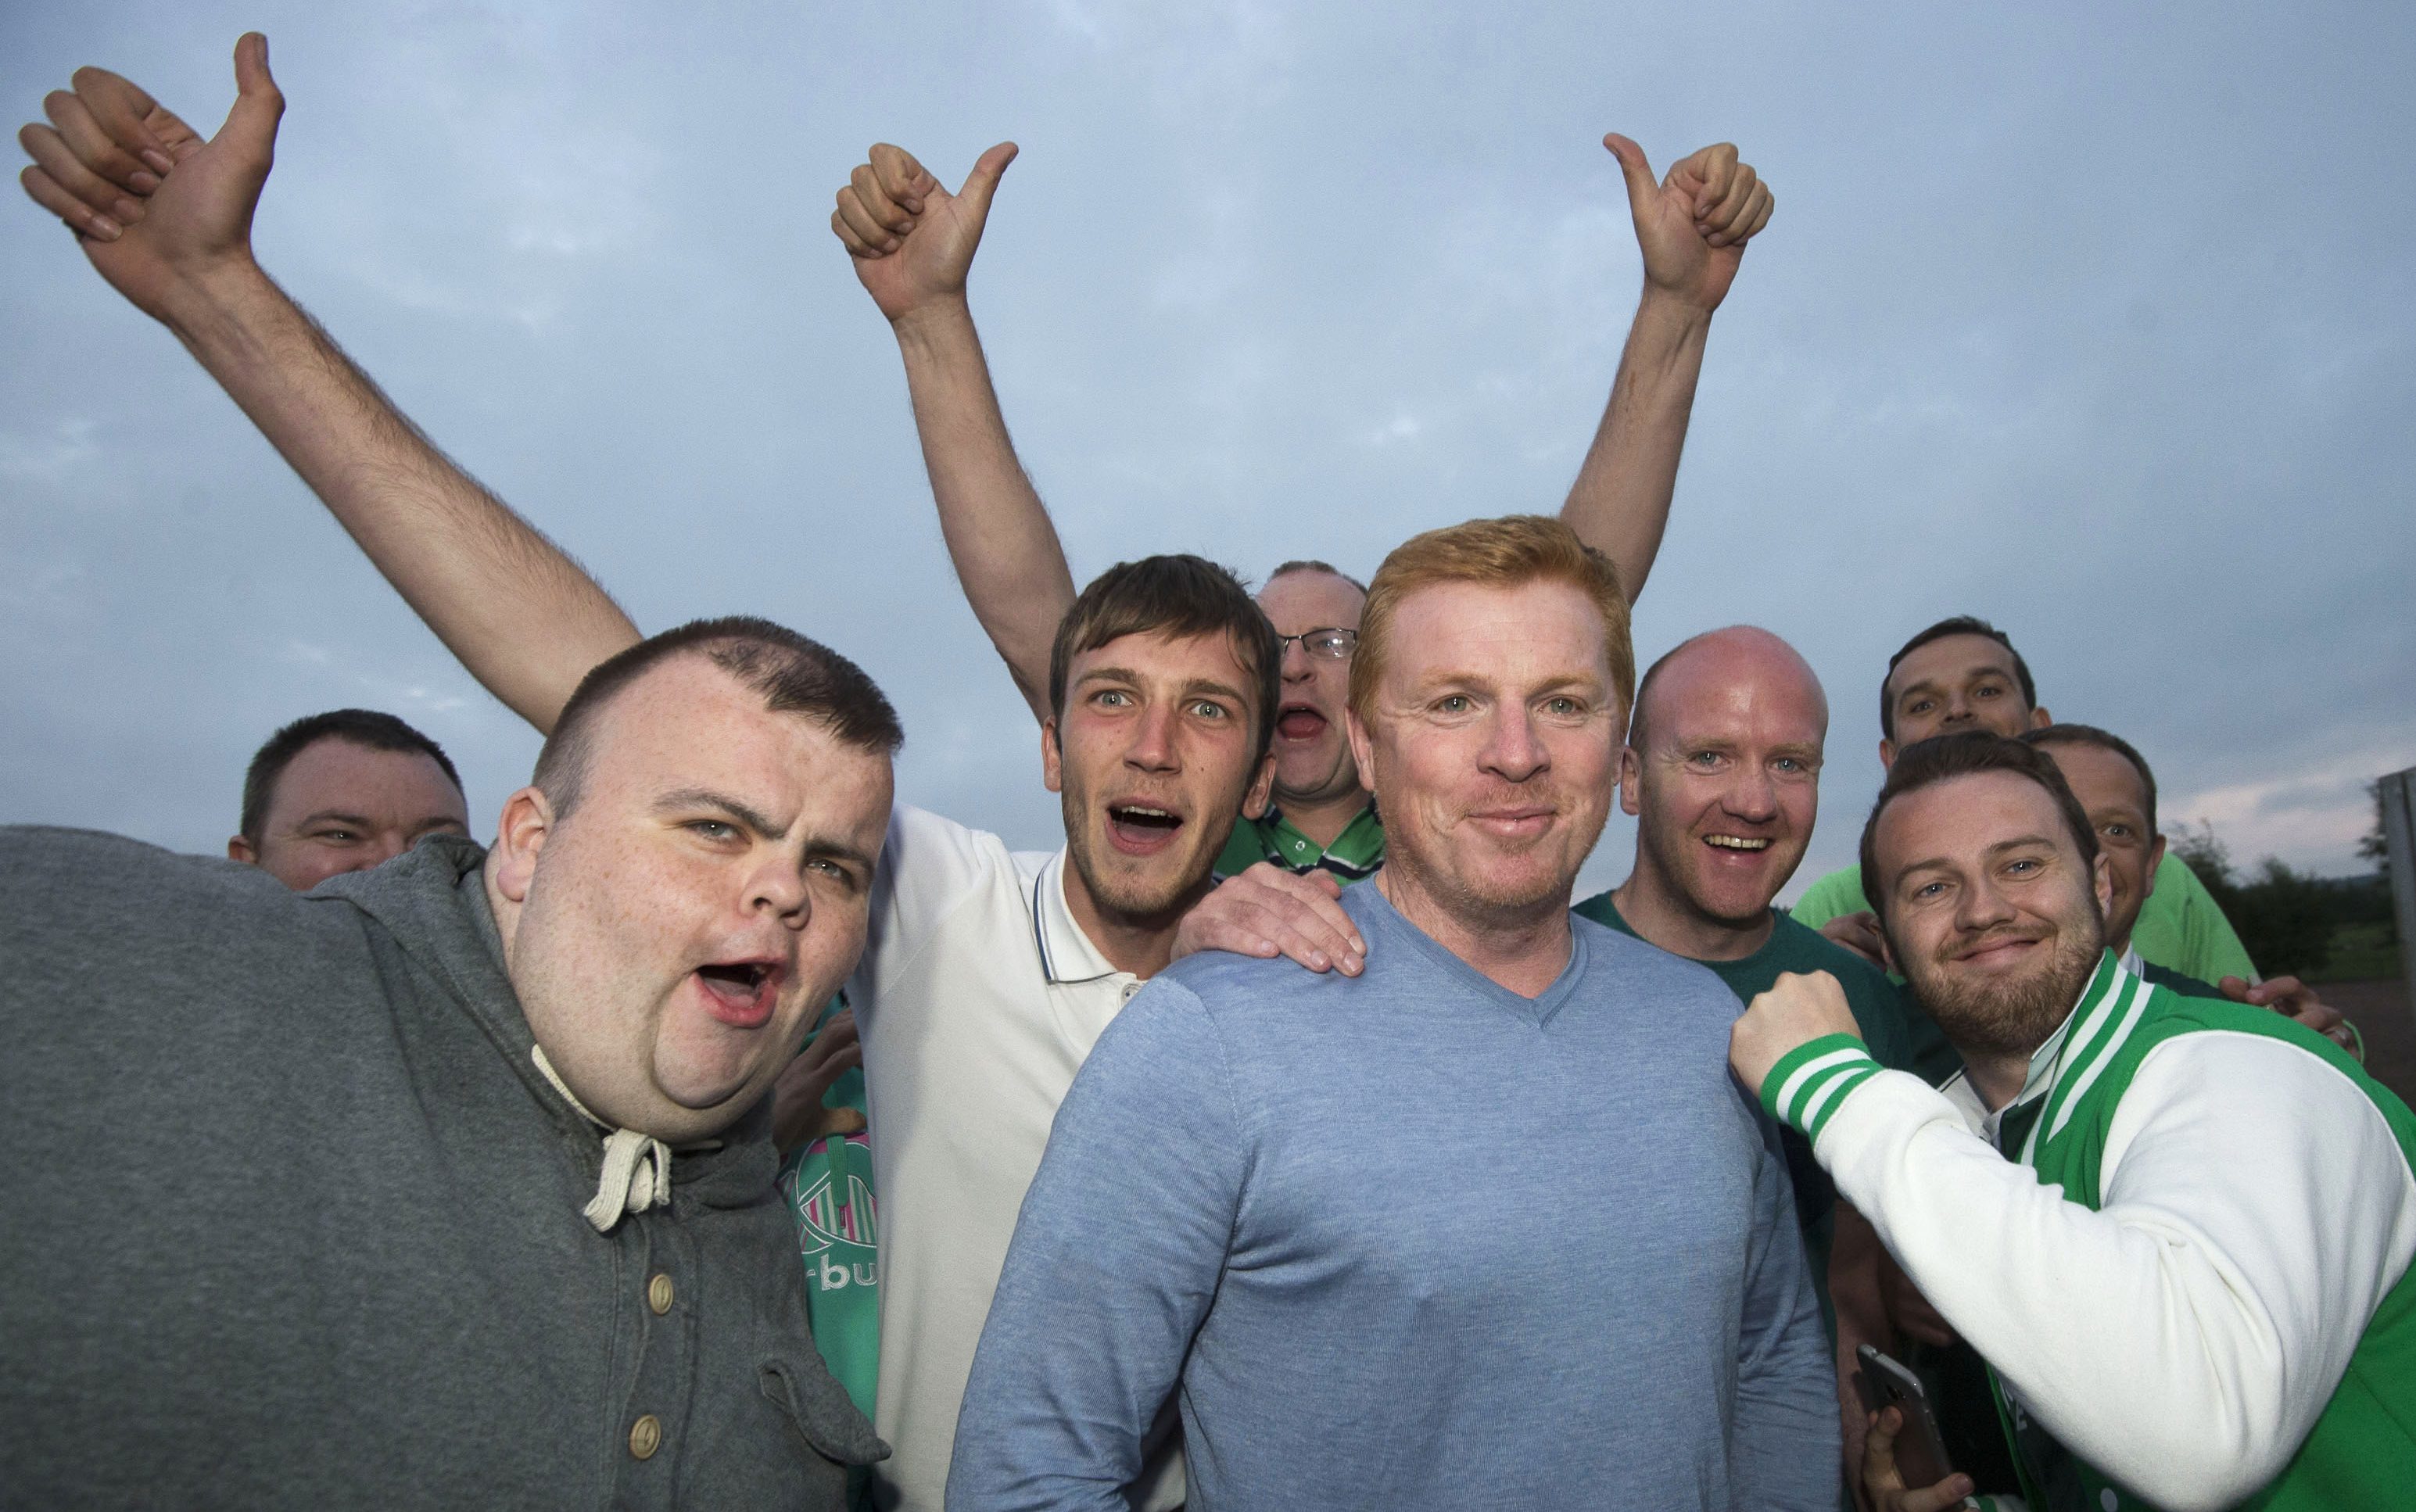 Neil Lennon, pictured with Hibs fans, has not always enjoyed good times.